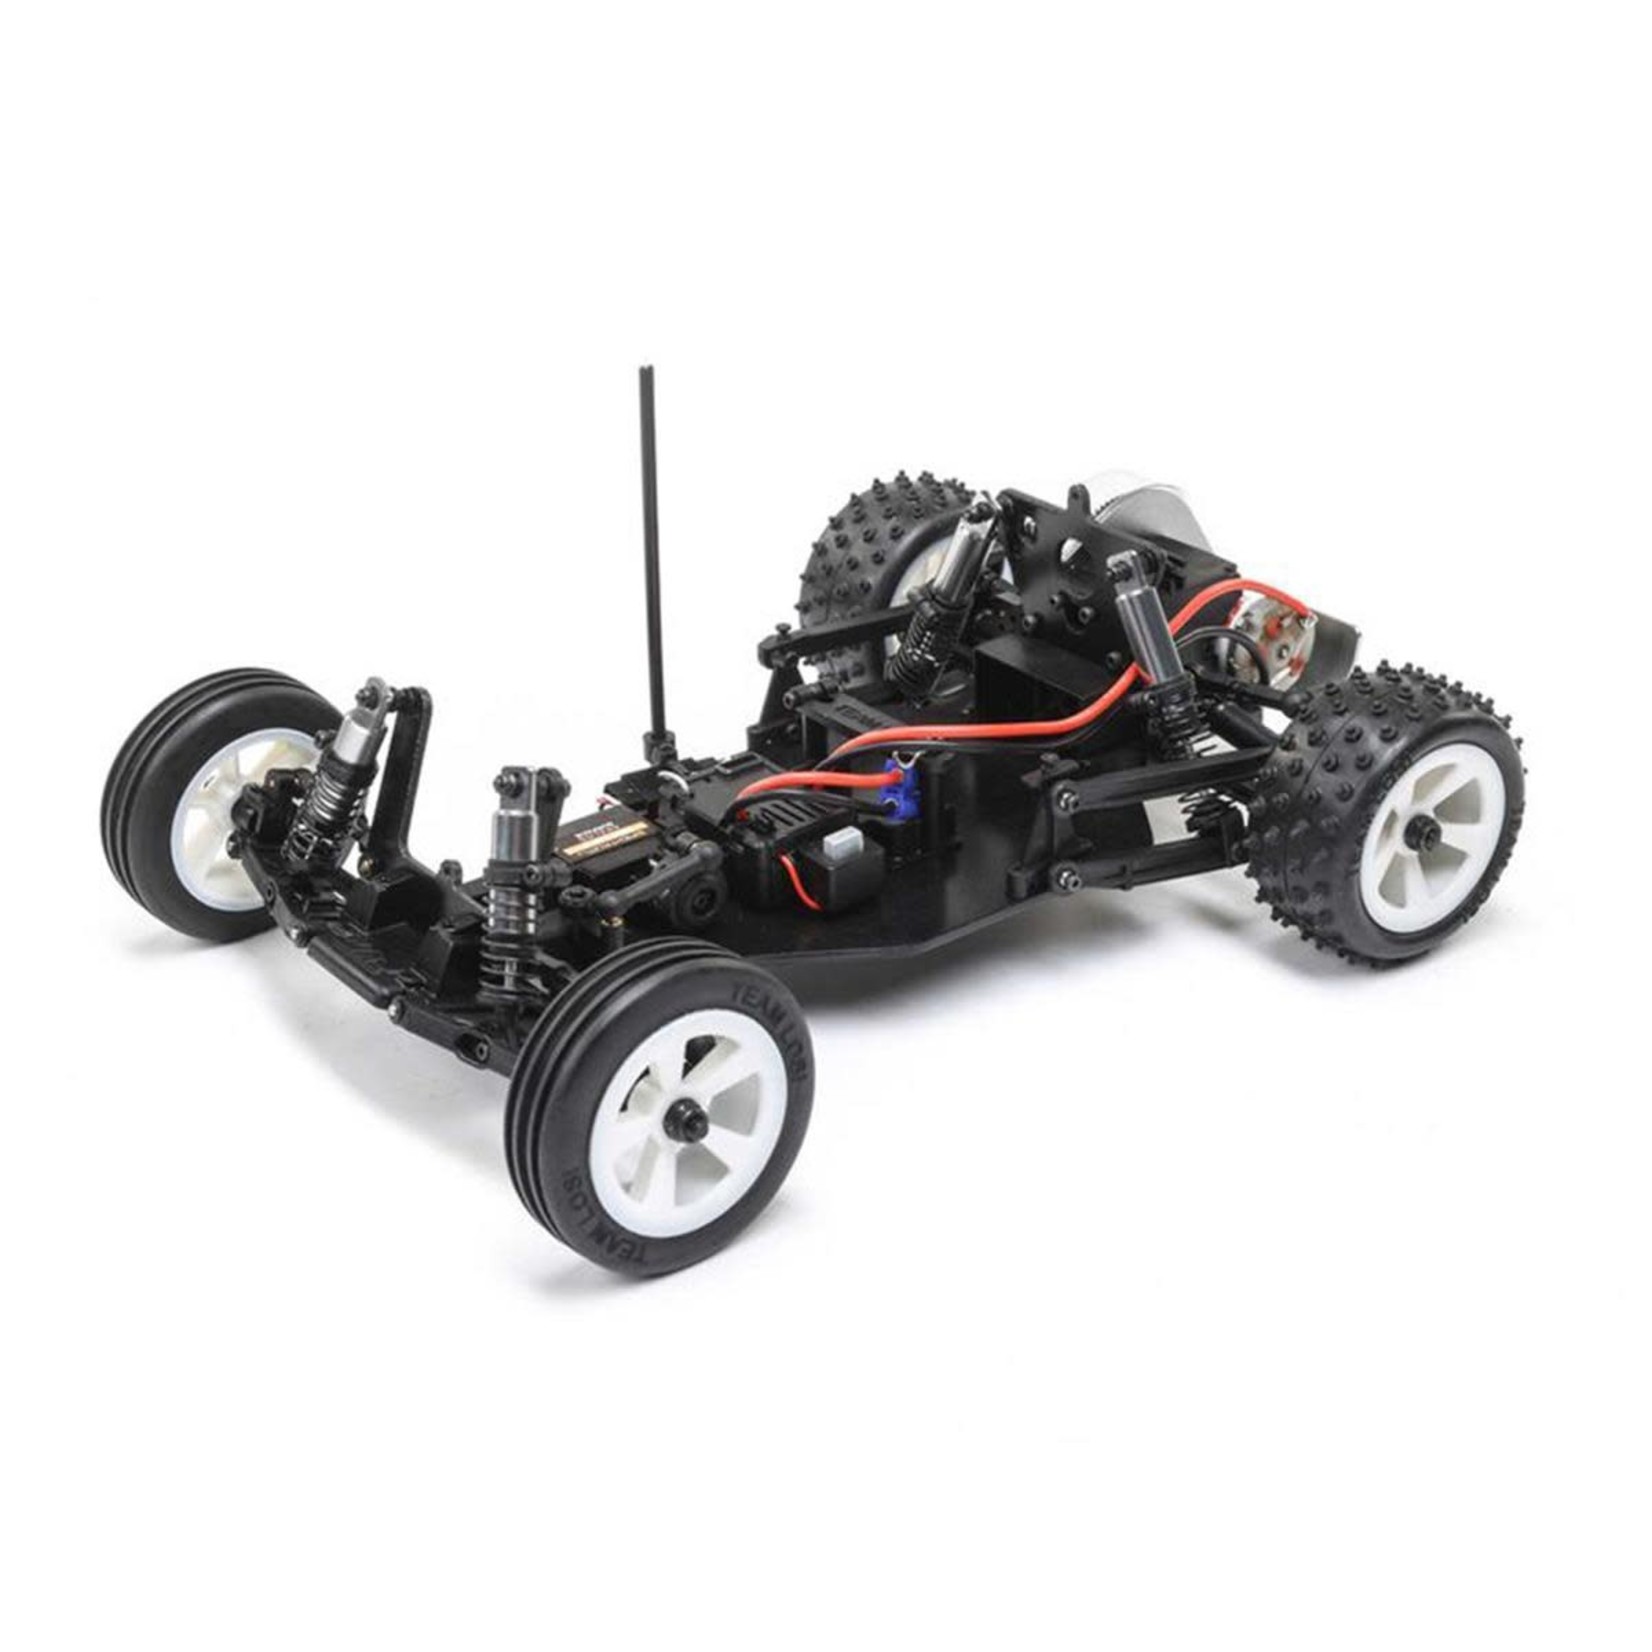 Losi Losi JRX2 1/16 RTR 2WD Buggy (Black) w/2.4GHz Radio, Battery & Charger #LOS01020T3